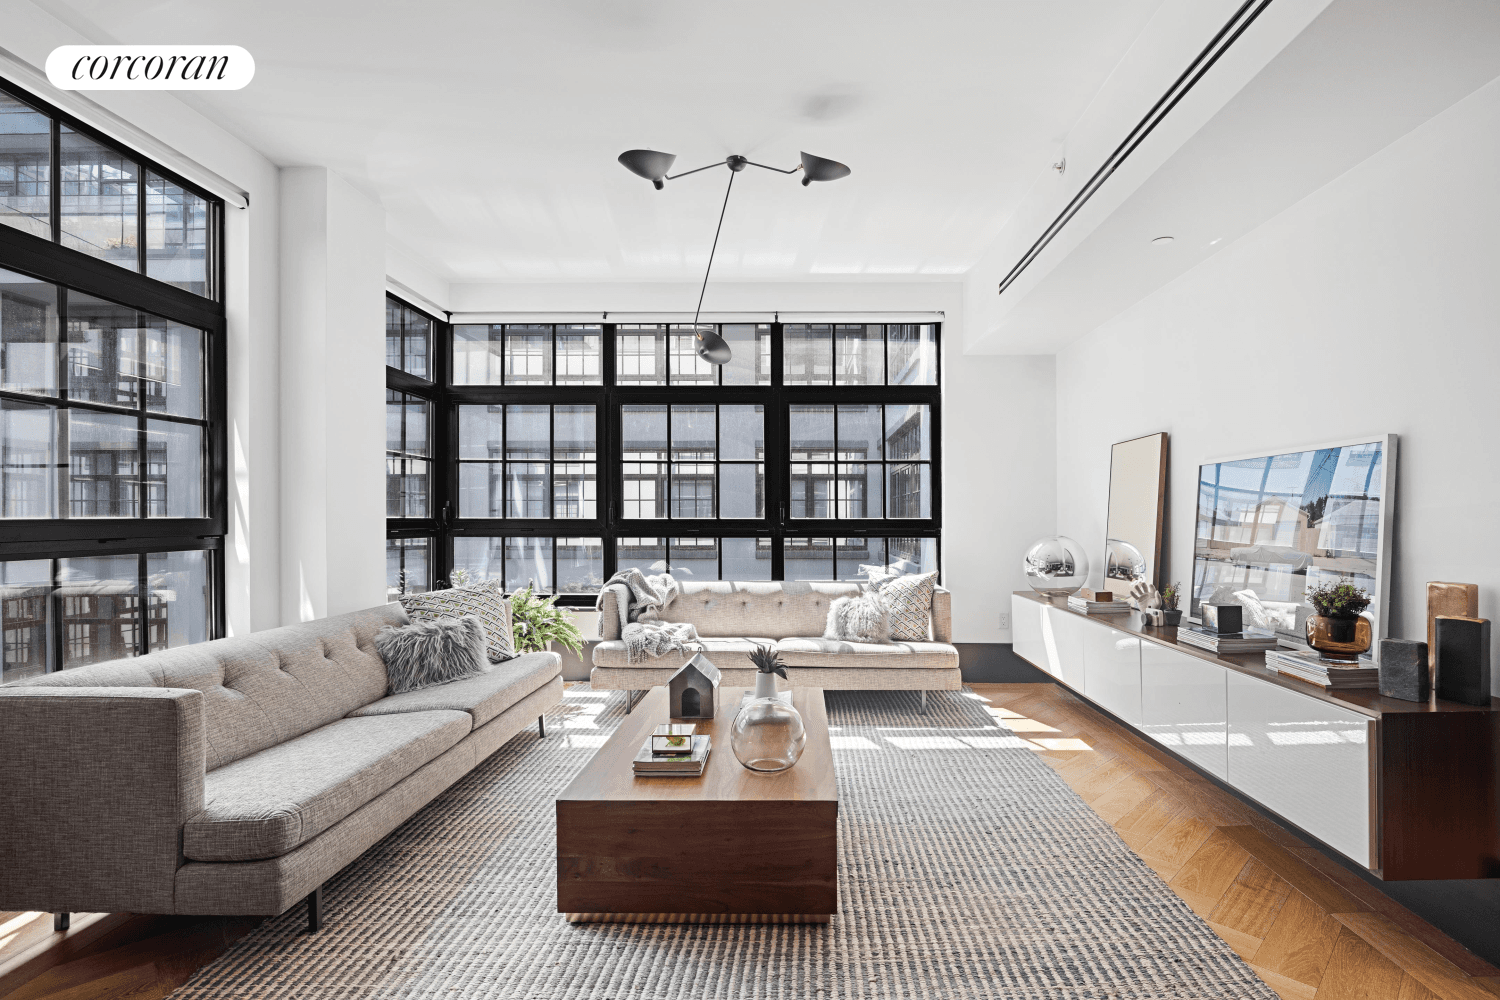 If you have been looking for more than just a cookie cutter 2 bedroom condo in Dumbo that exceeds ALL expectations in terms of scale, design, amenities and location, then ...